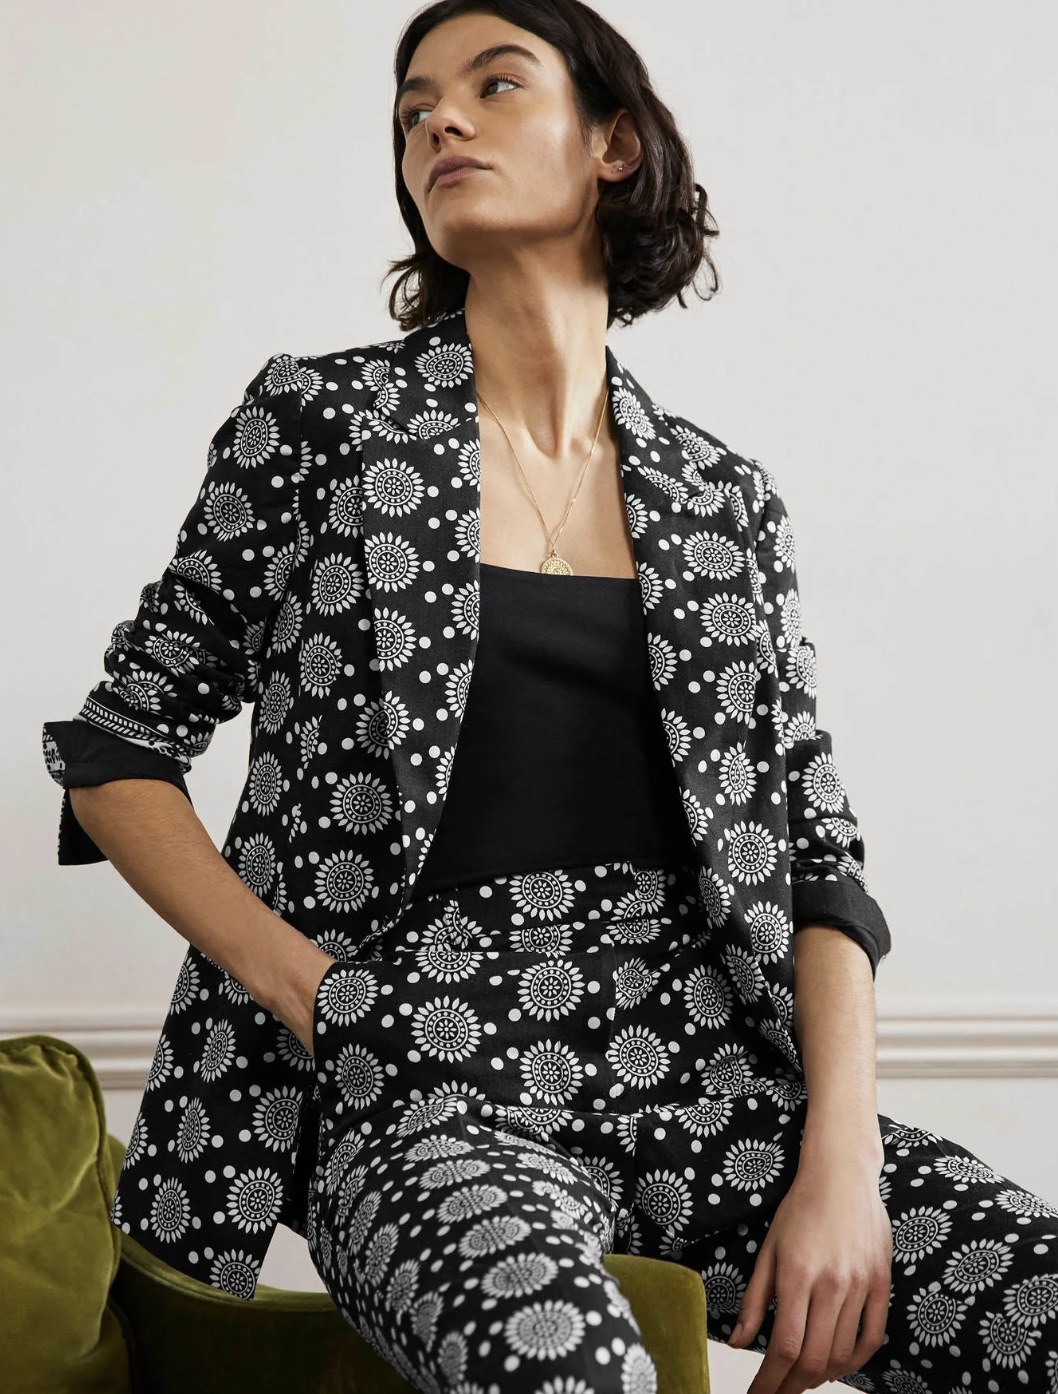 model wearing the blazer with black and white pattern and matching pants